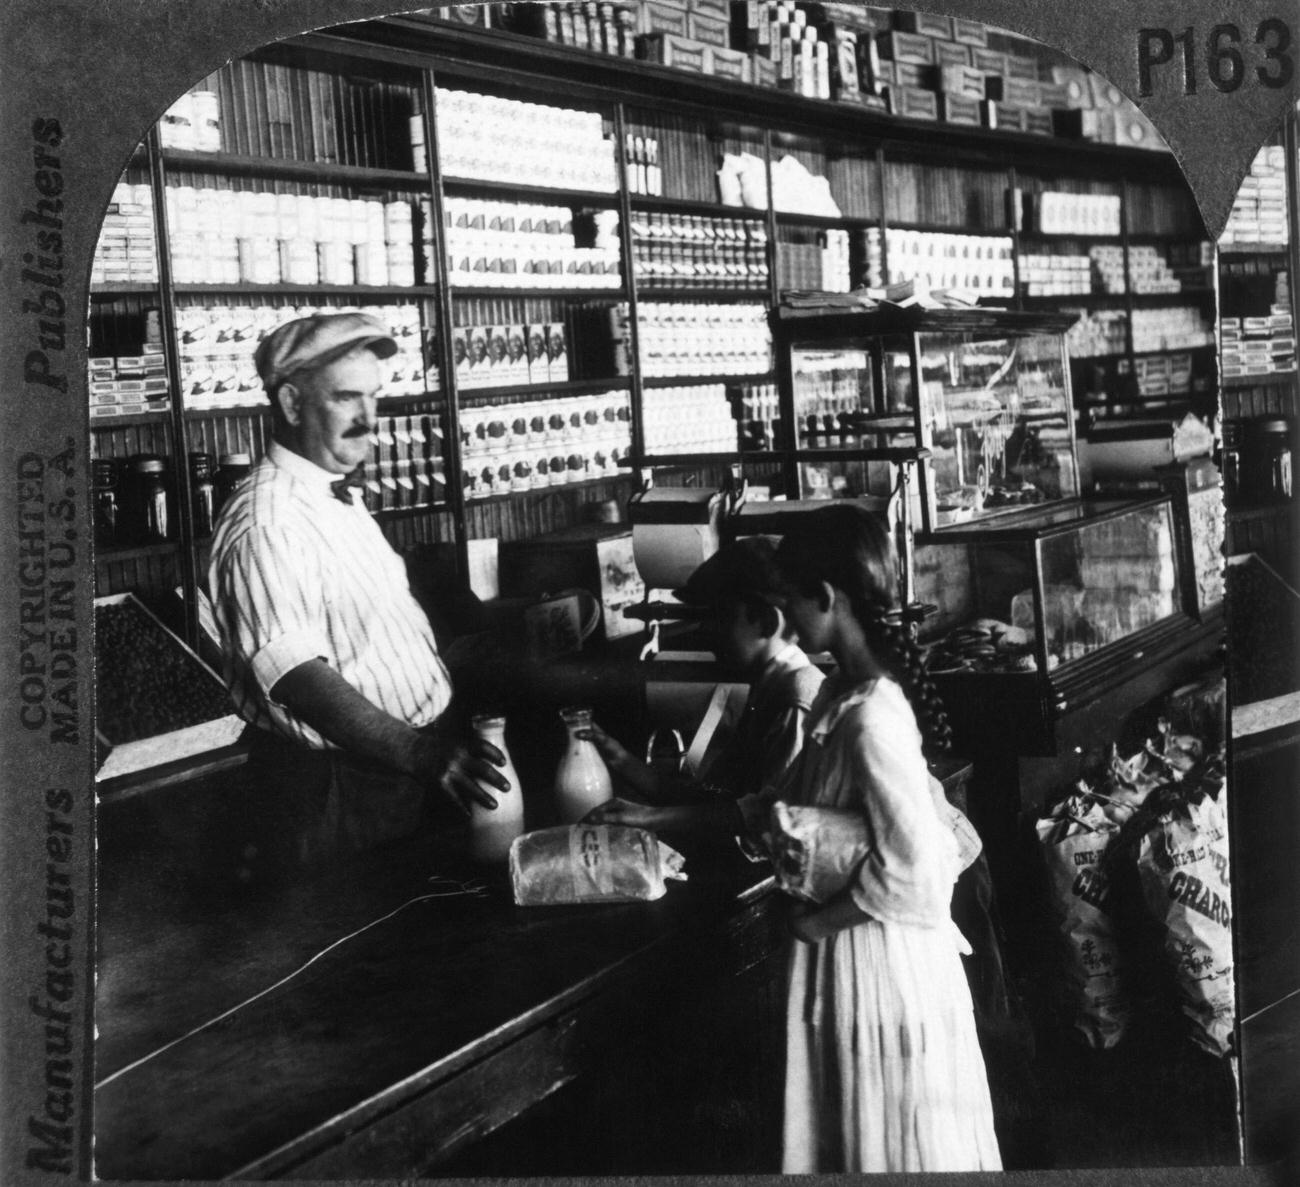 Midwestern Grocery Store, USA, 1900